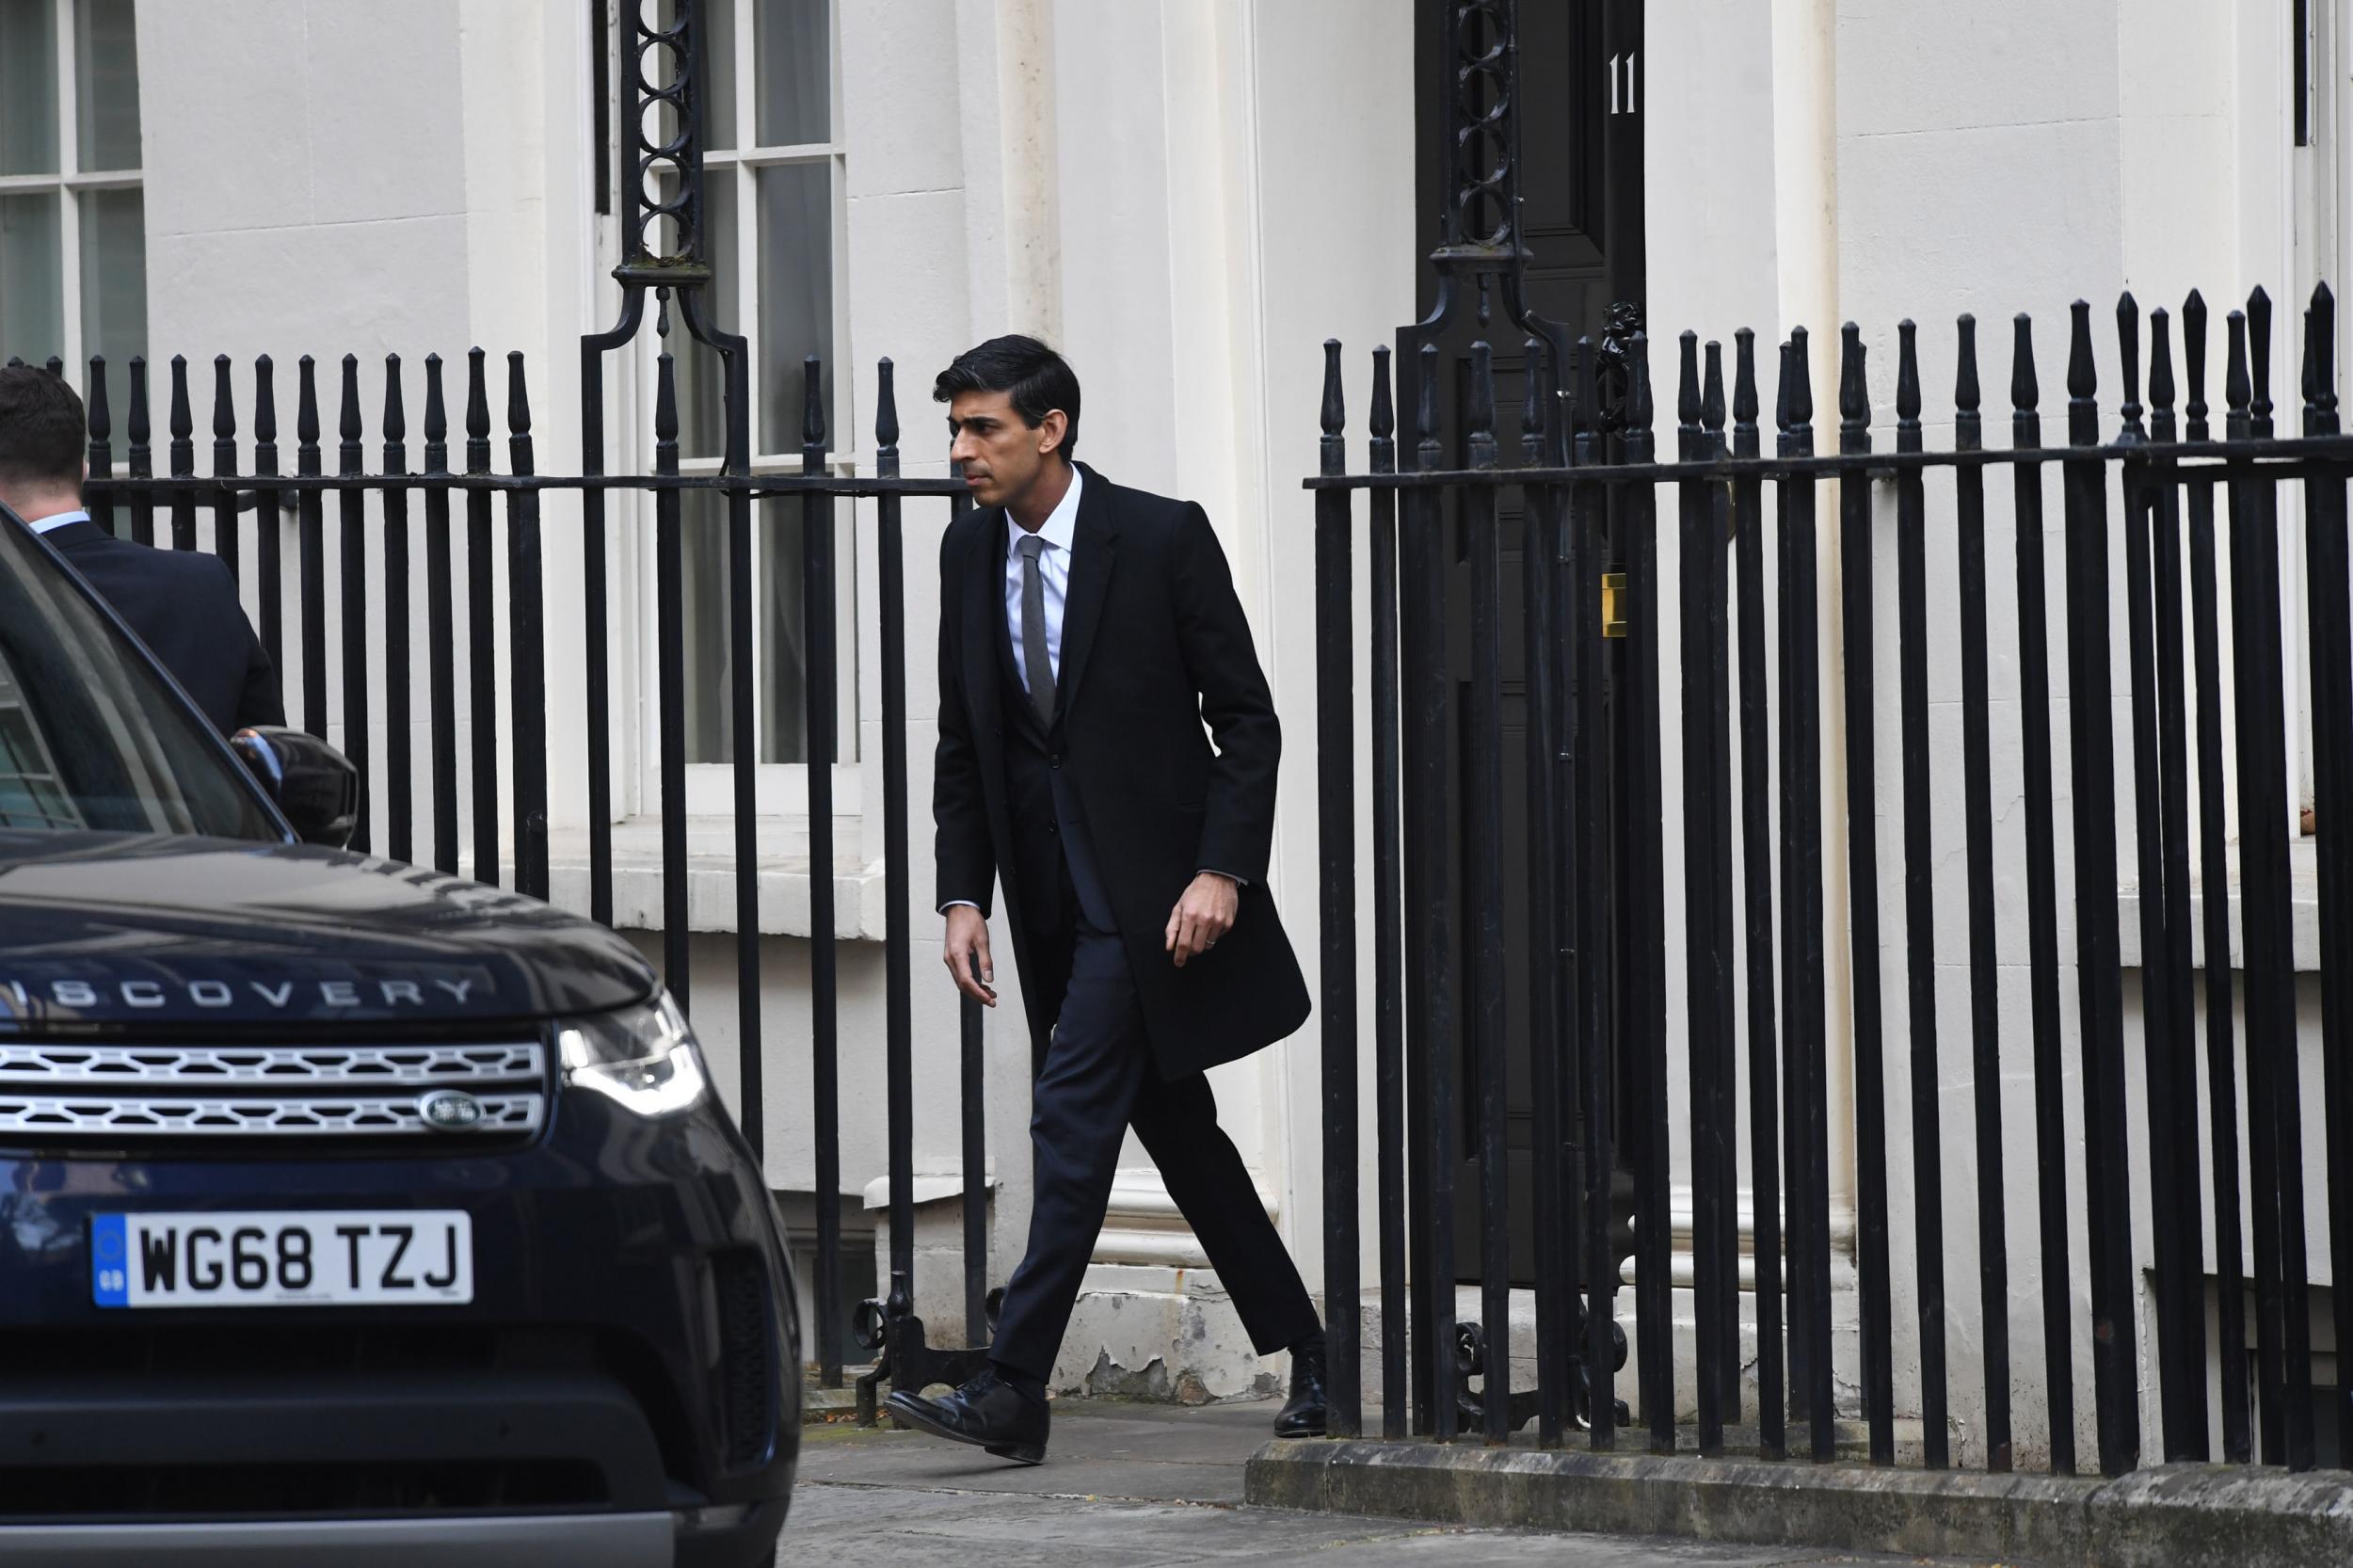 The chancellor, Rishi Sunak, has done well during a baptism of fire, but the tests will continue